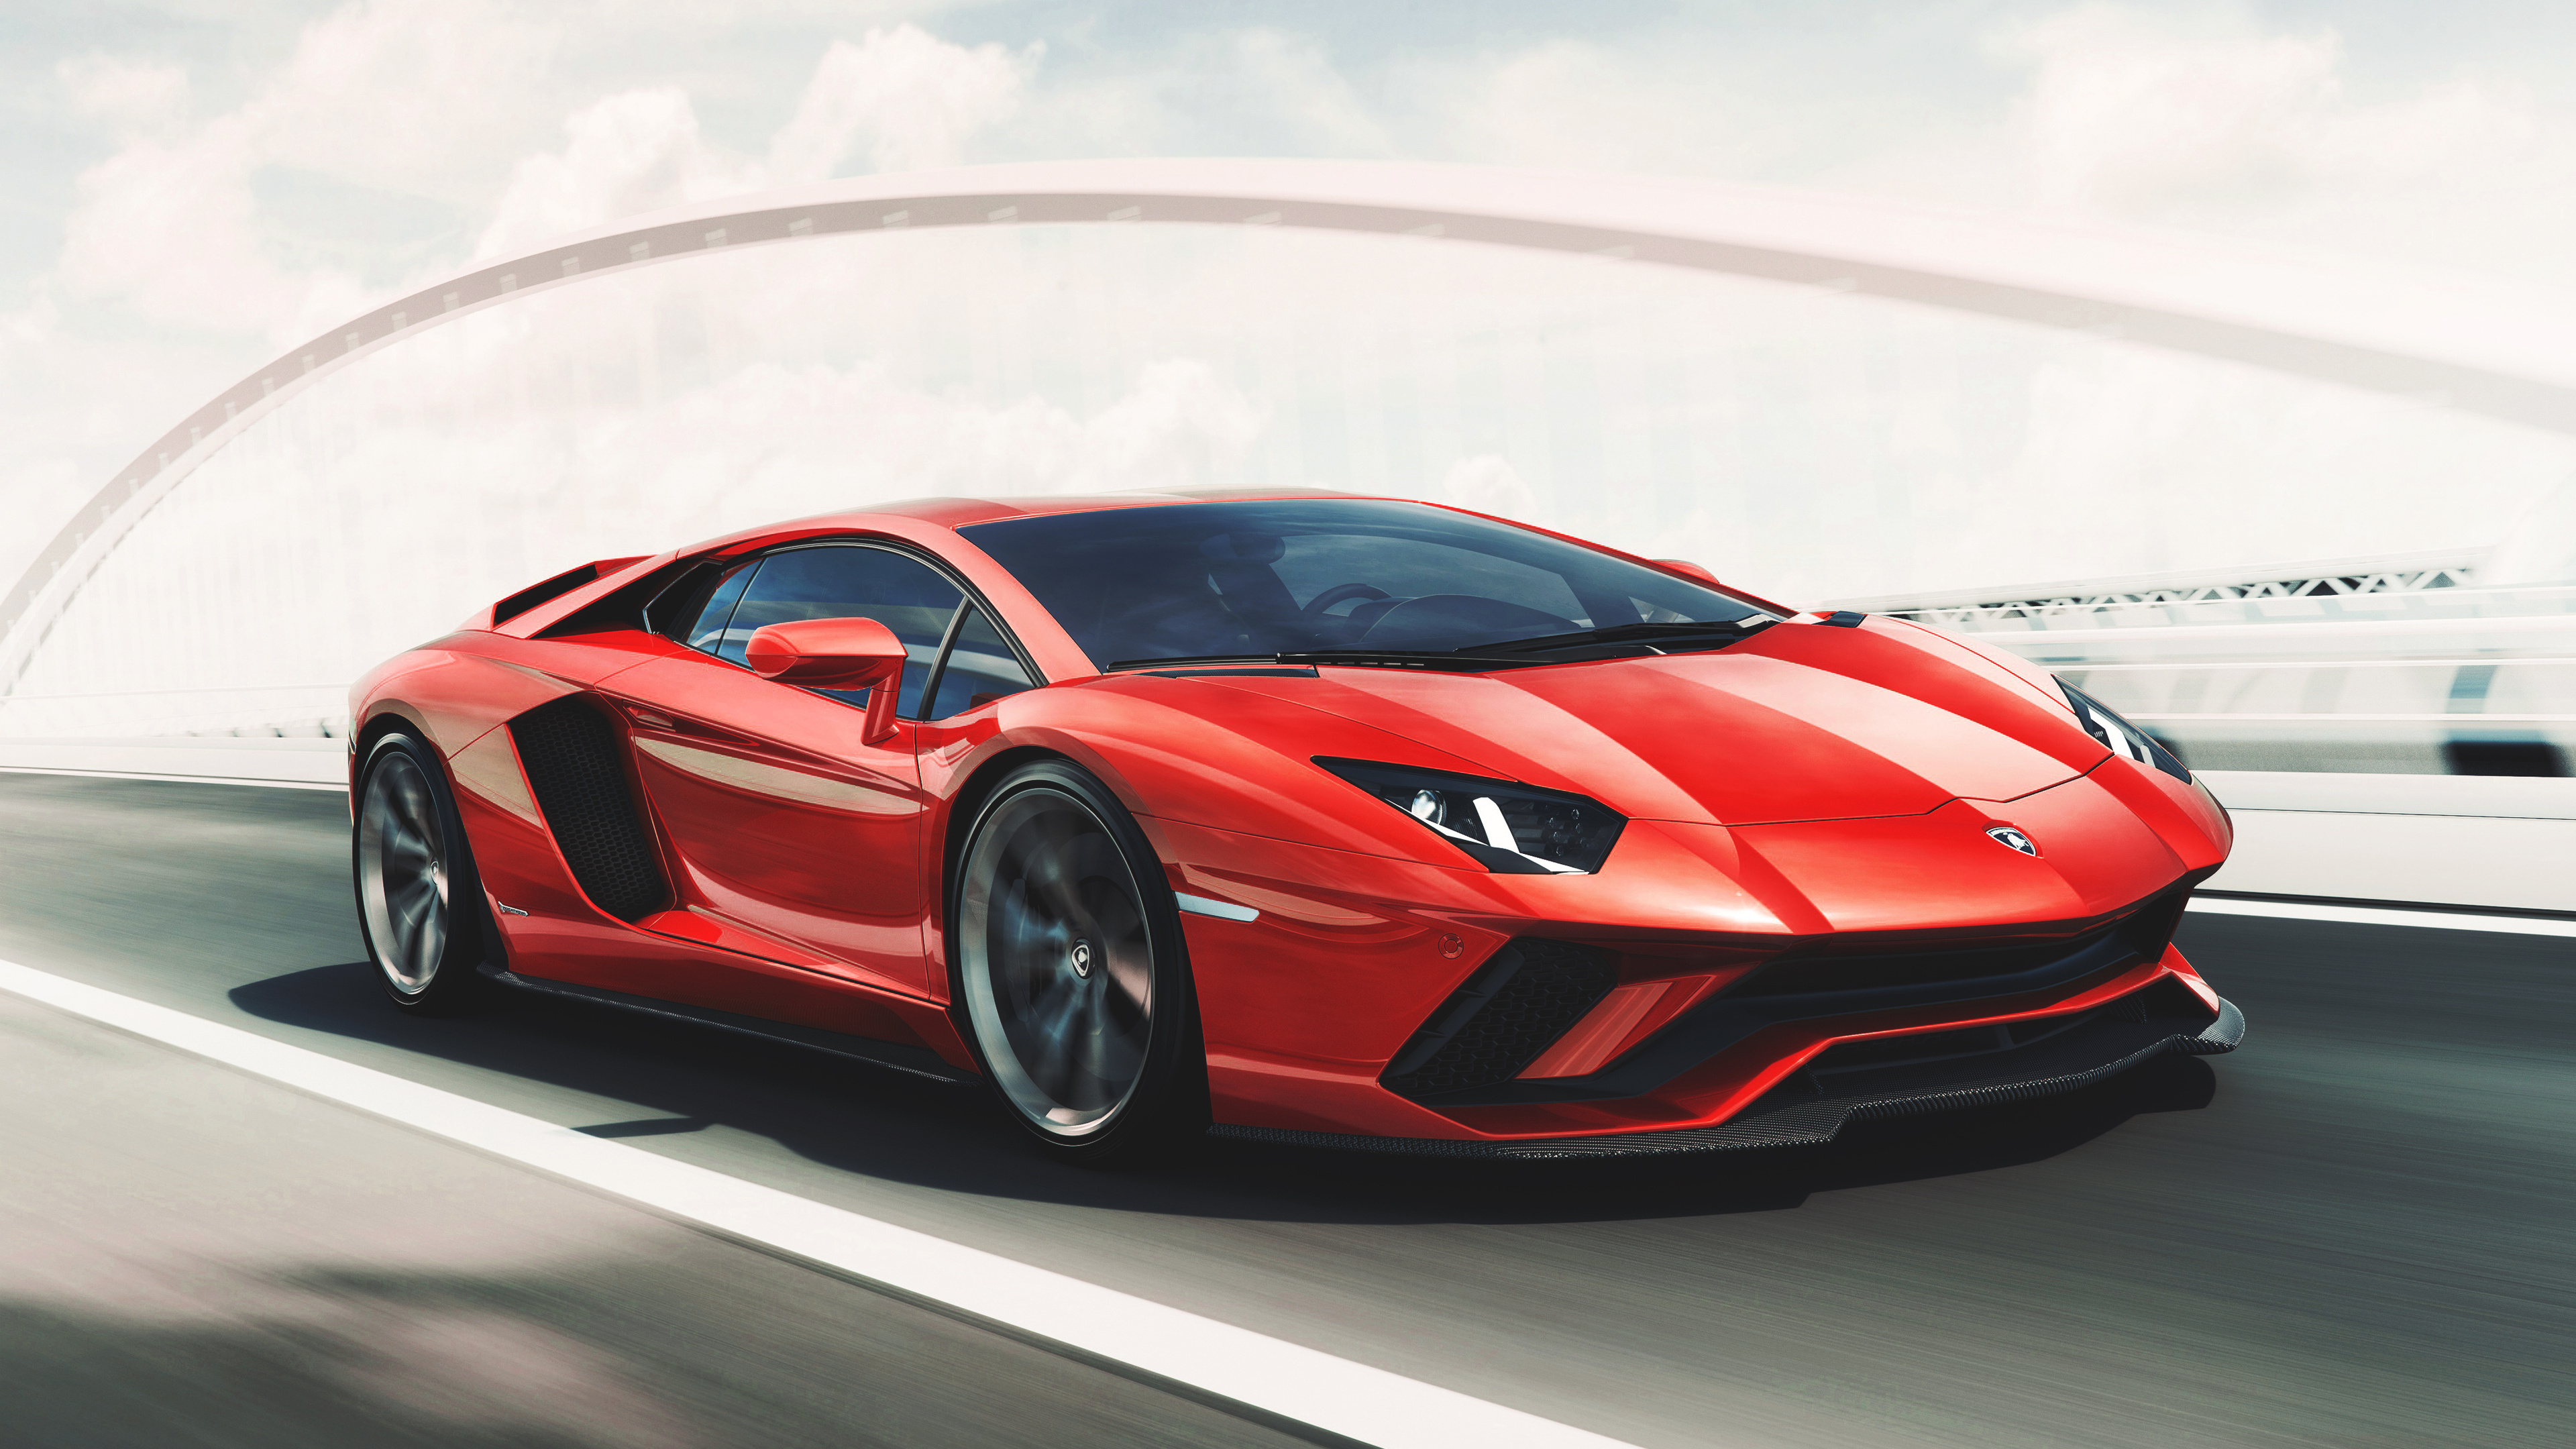 Lamborghini Aventador, Red-hot 4K marvel, HD wallpapers and images, Photos and pictures, 3840x2160 4K Desktop